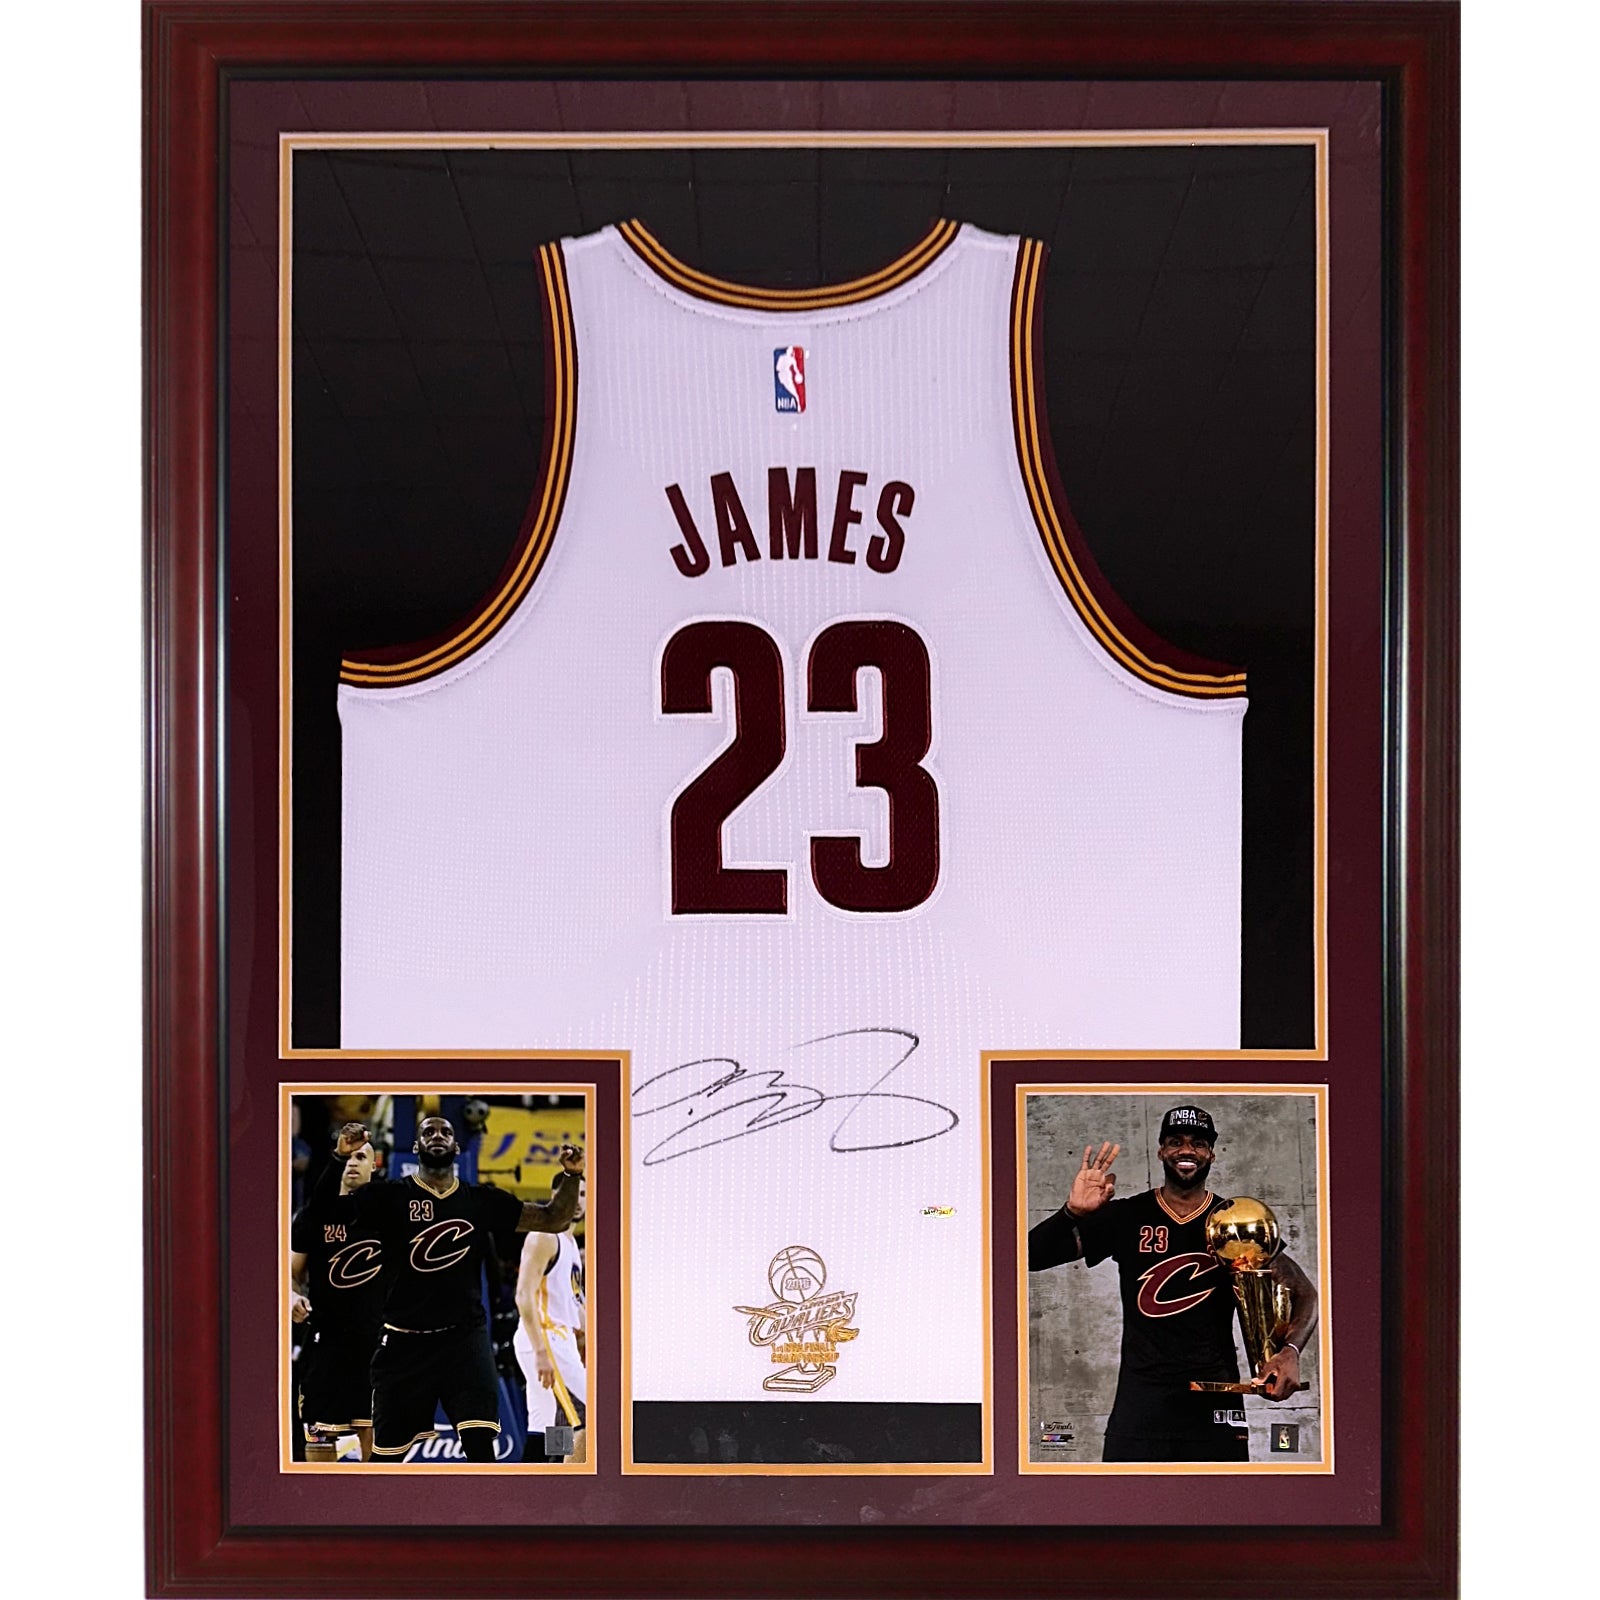 Lebron James Autographed Cleveland Cavaliers (White #6) Deluxe Framed Jersey - 2016 1st NBA Finals Championship - UDA Upper Deck